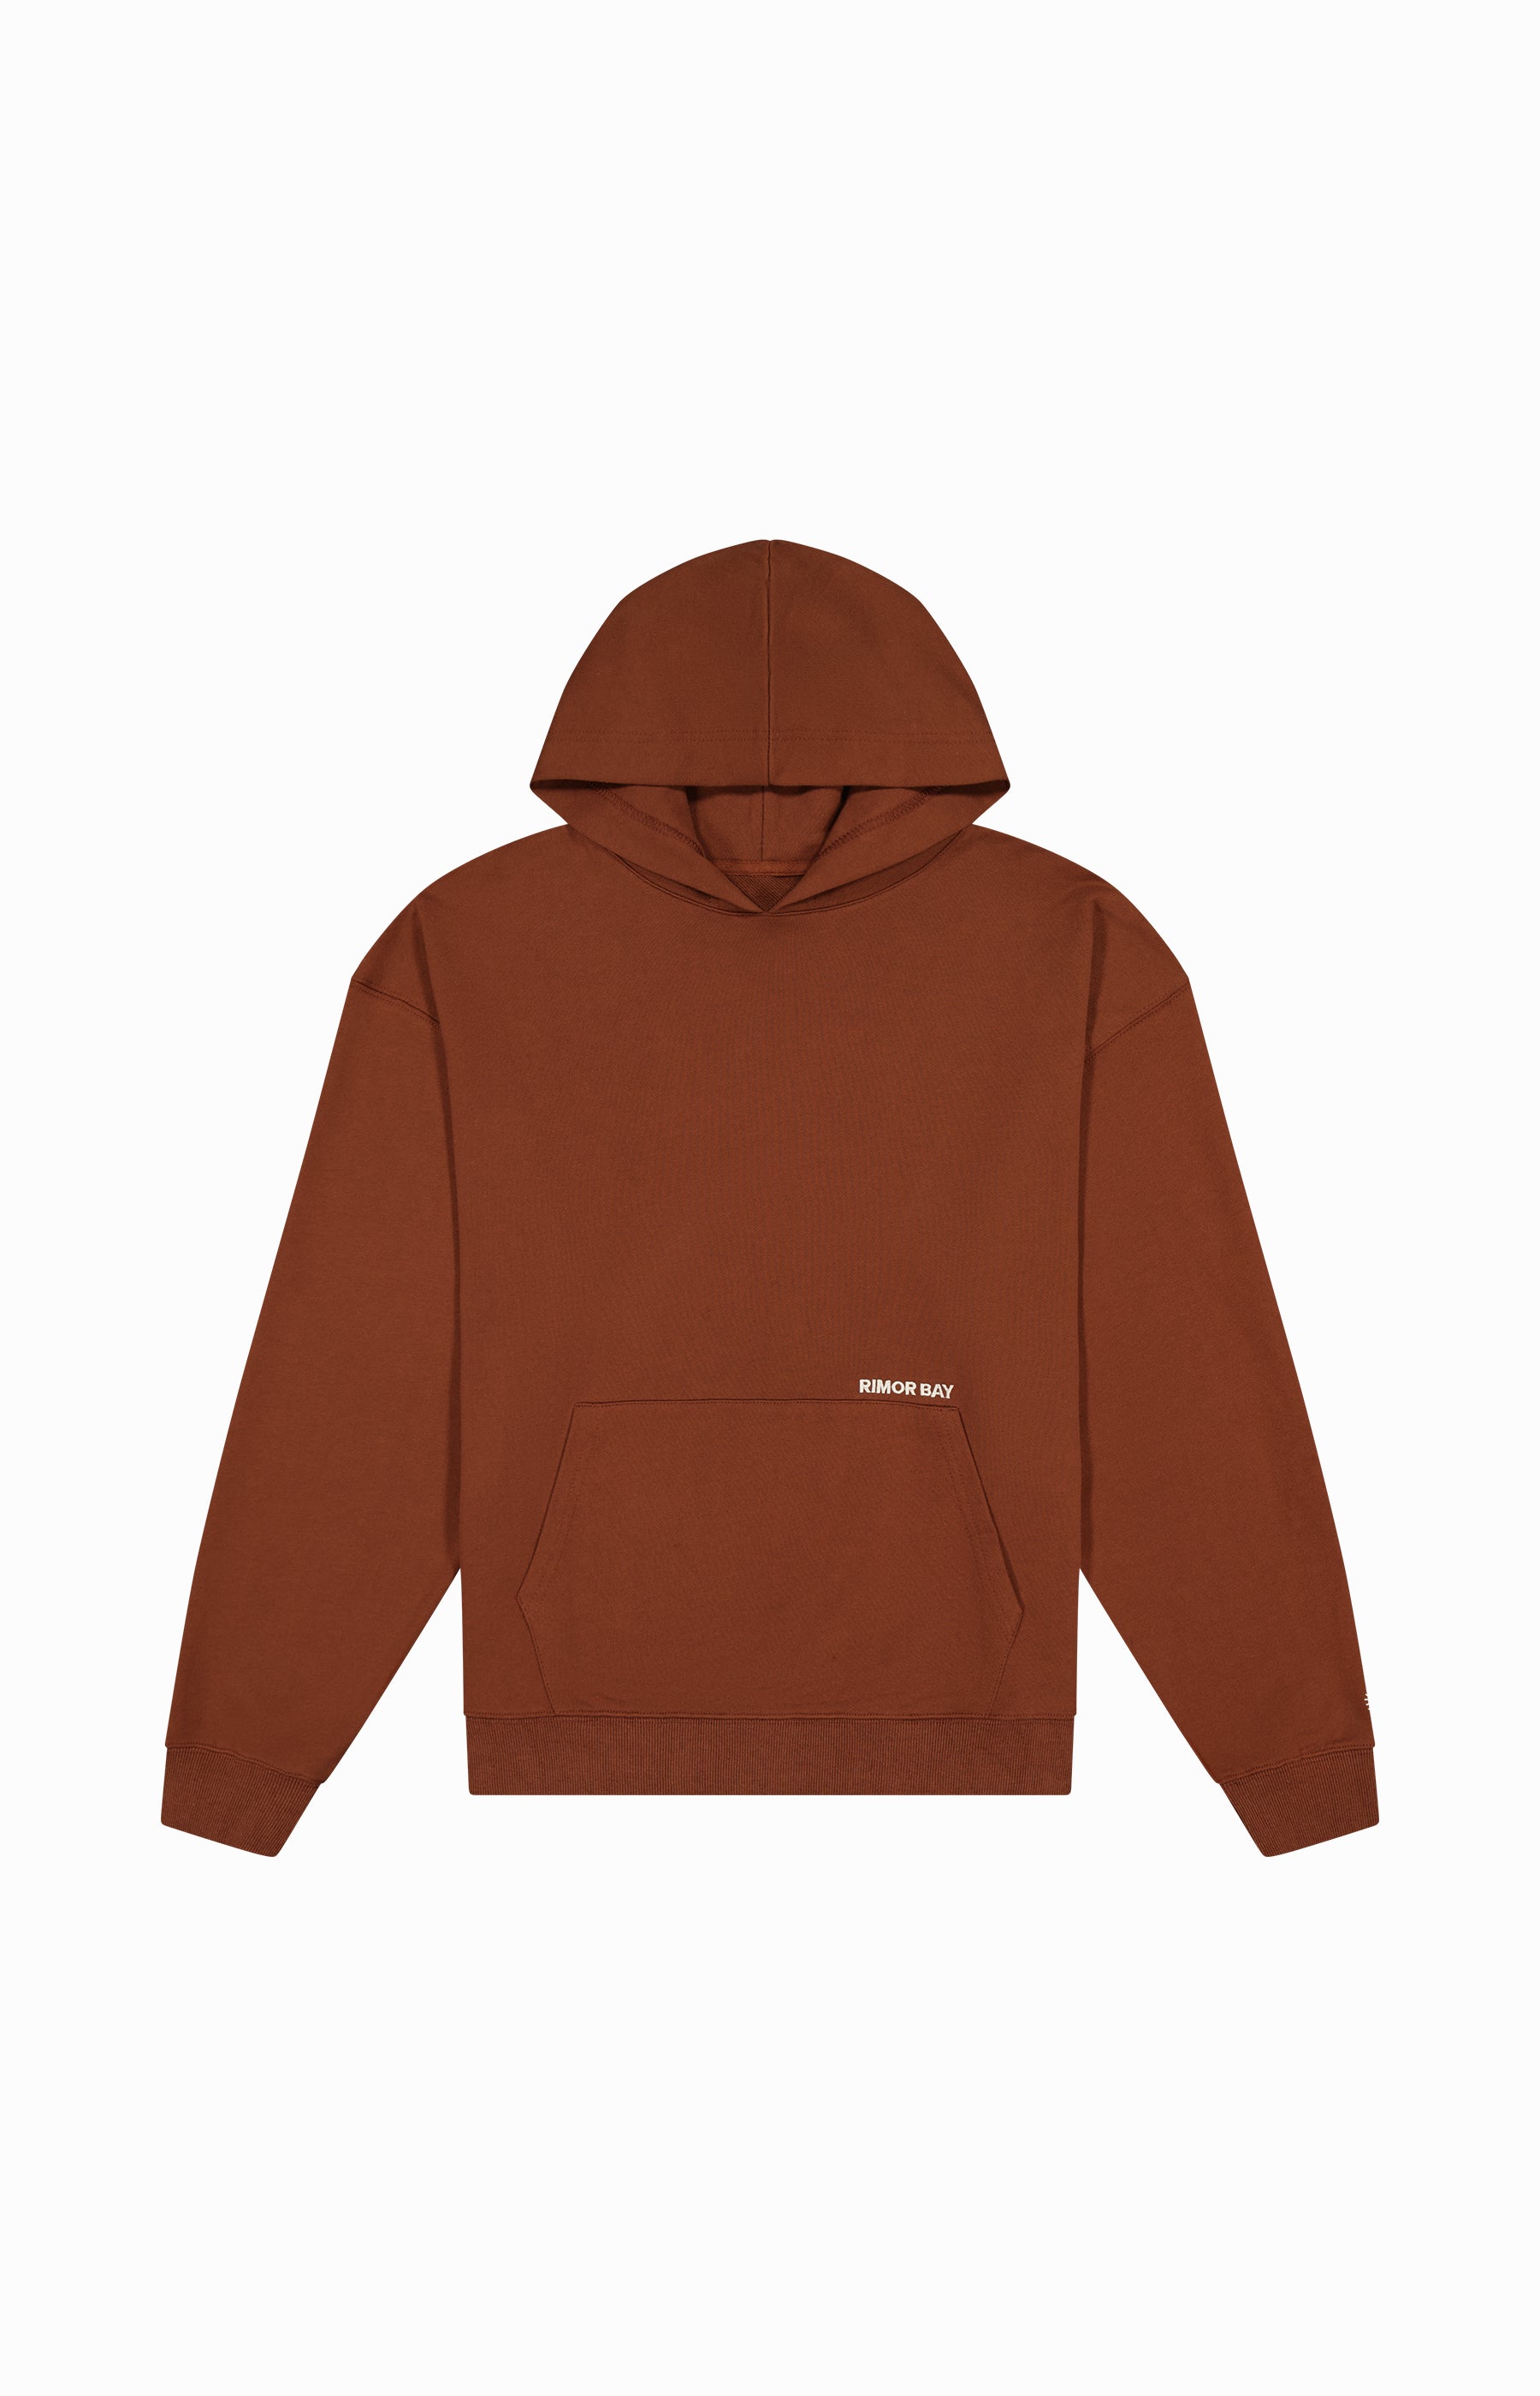 front of brown hoodie with logo and kangaroo pocket